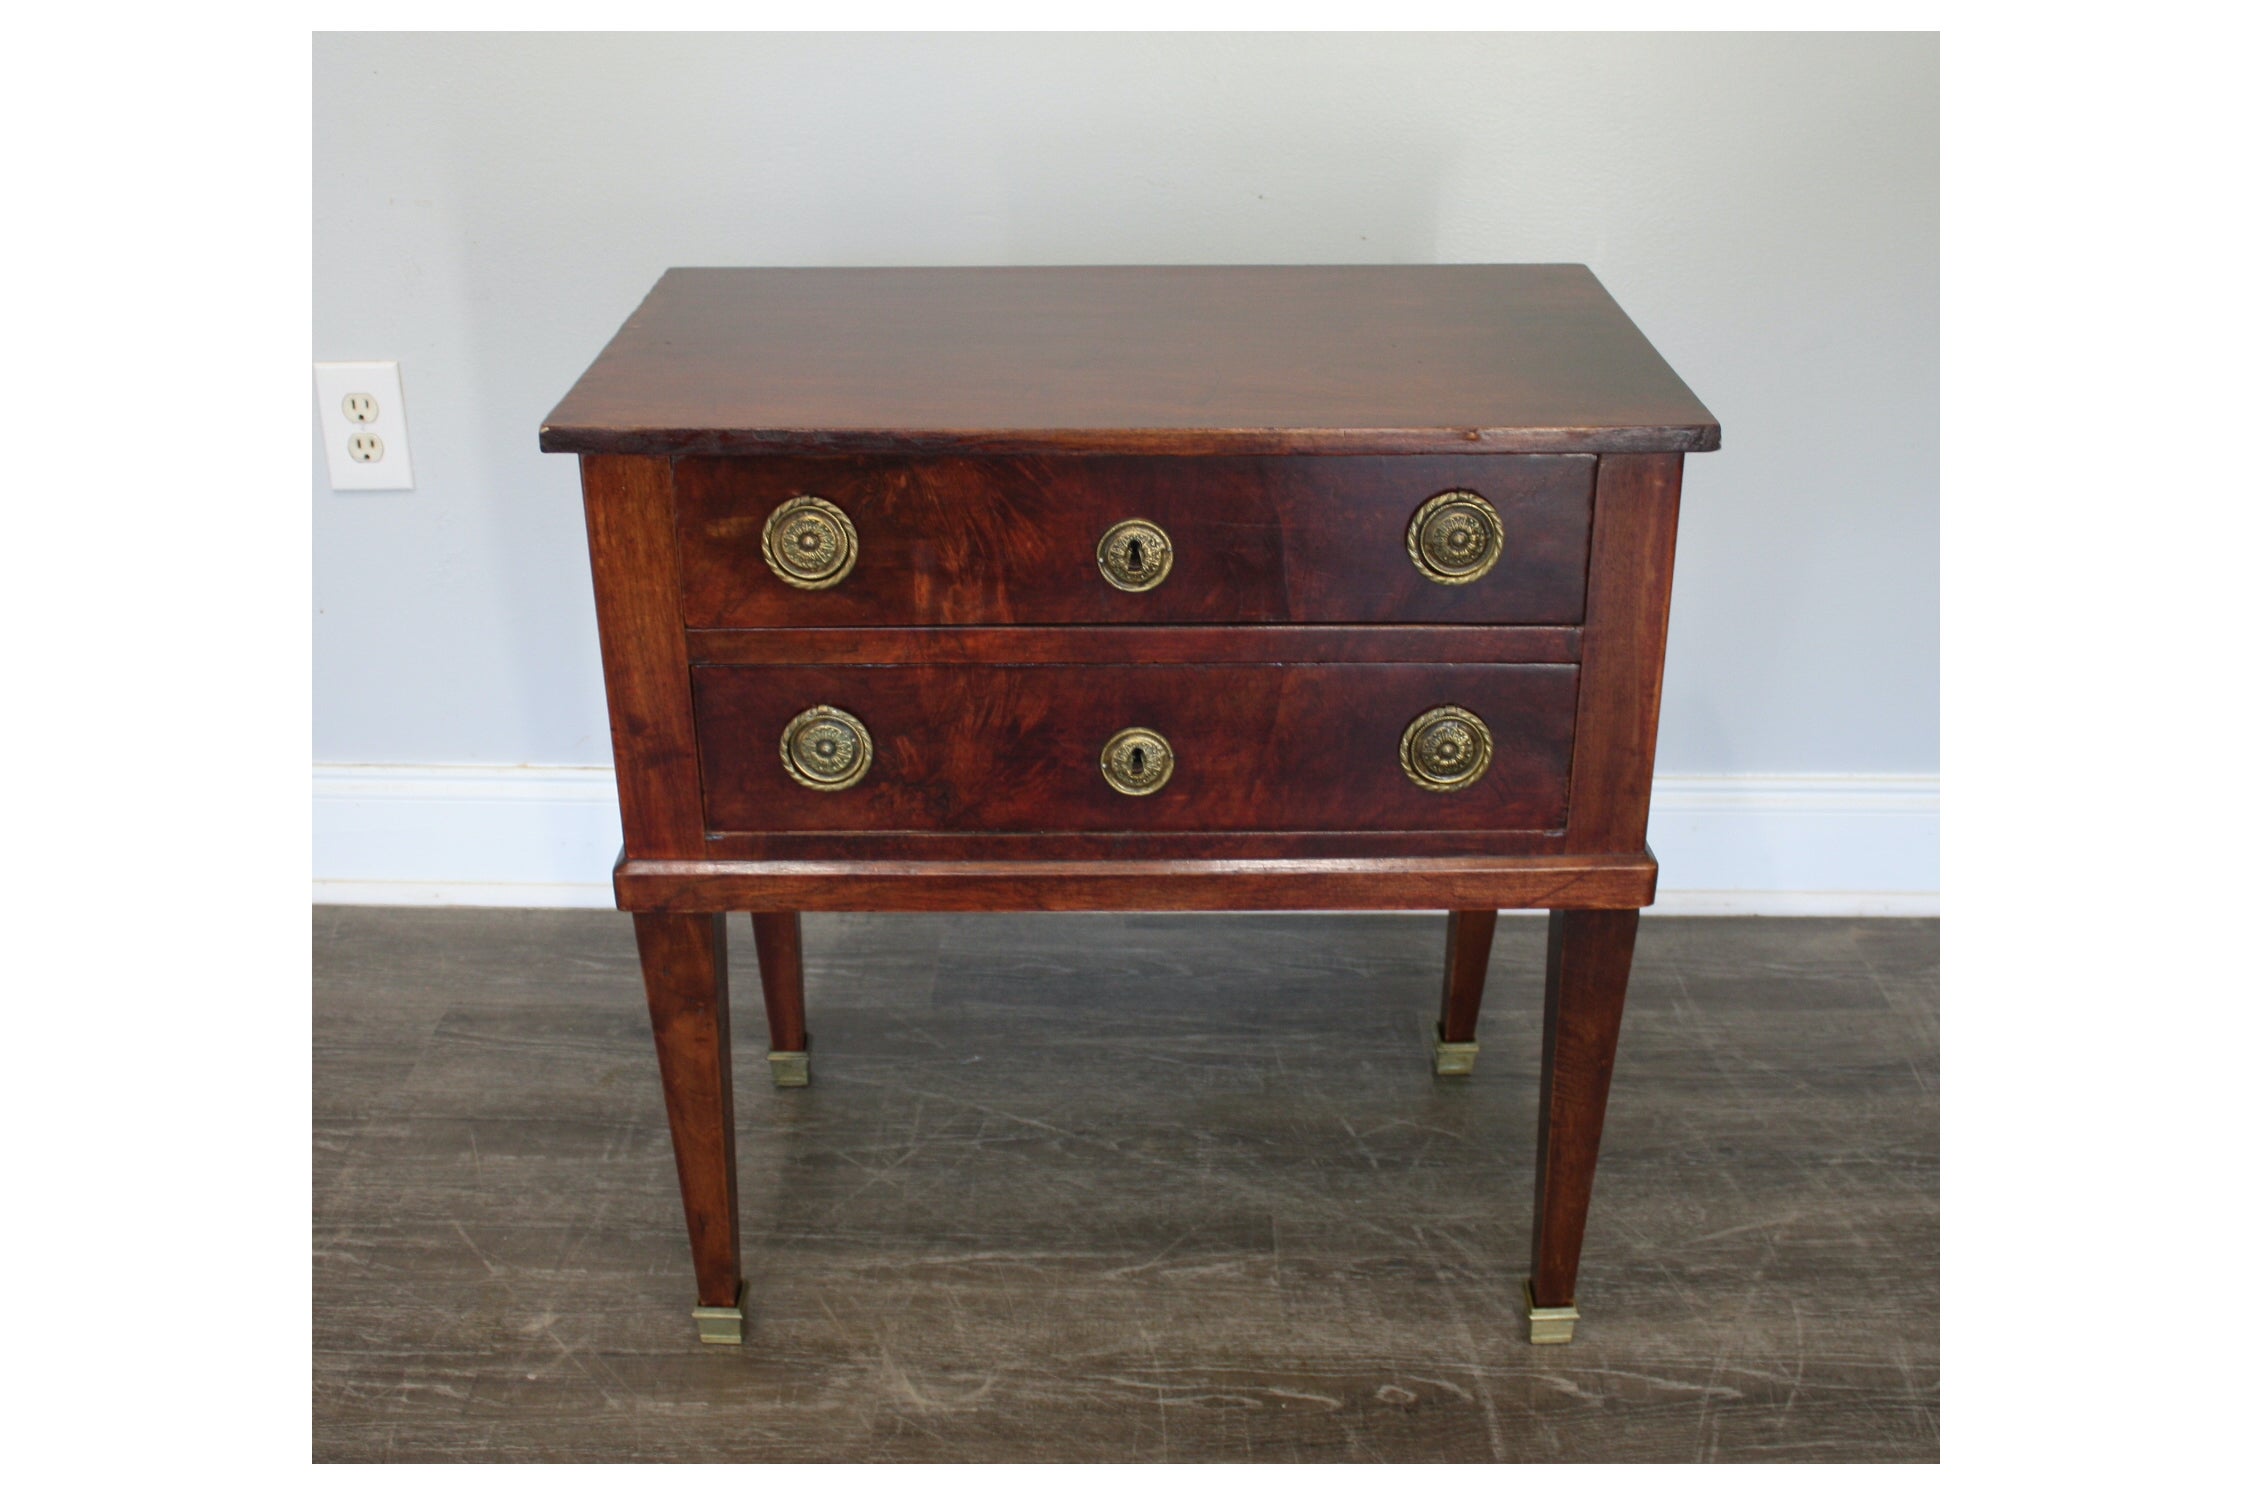 This Louis XVI style chest is small and made of flamed mahogany.